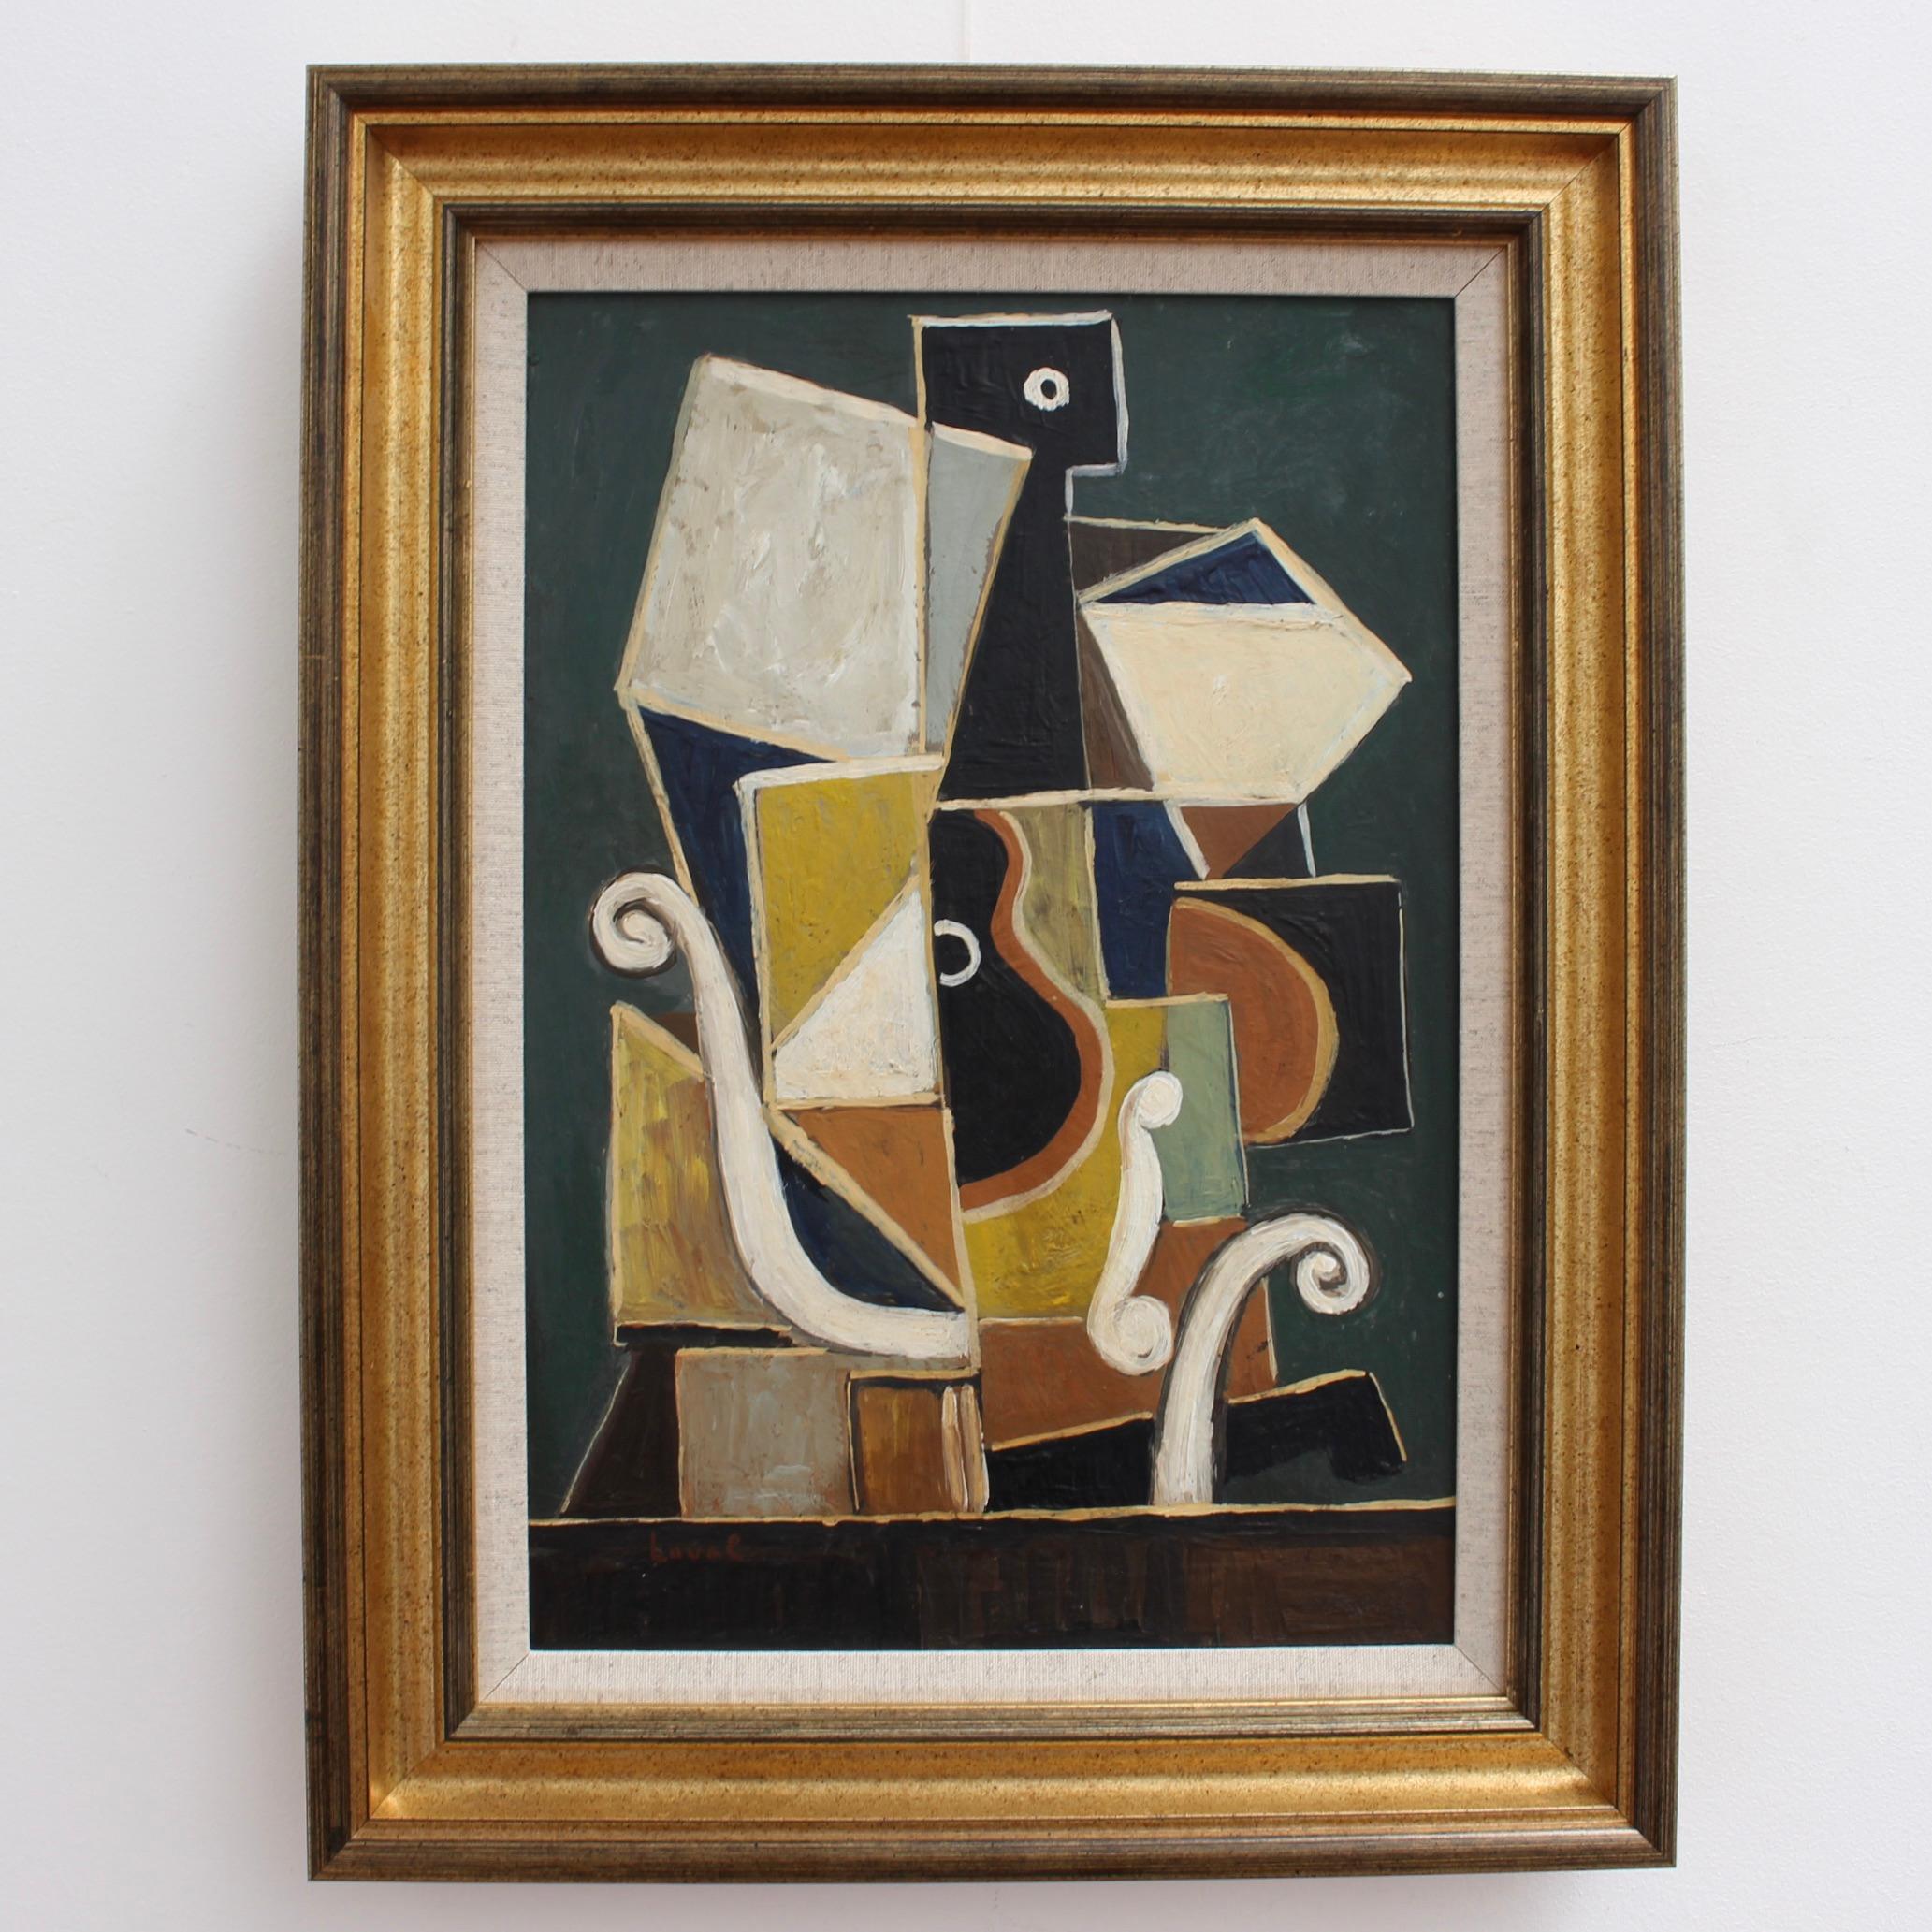 'Cubist Still Life with Guitar', Berlin School (circa 1970s) - Painting by Unknown